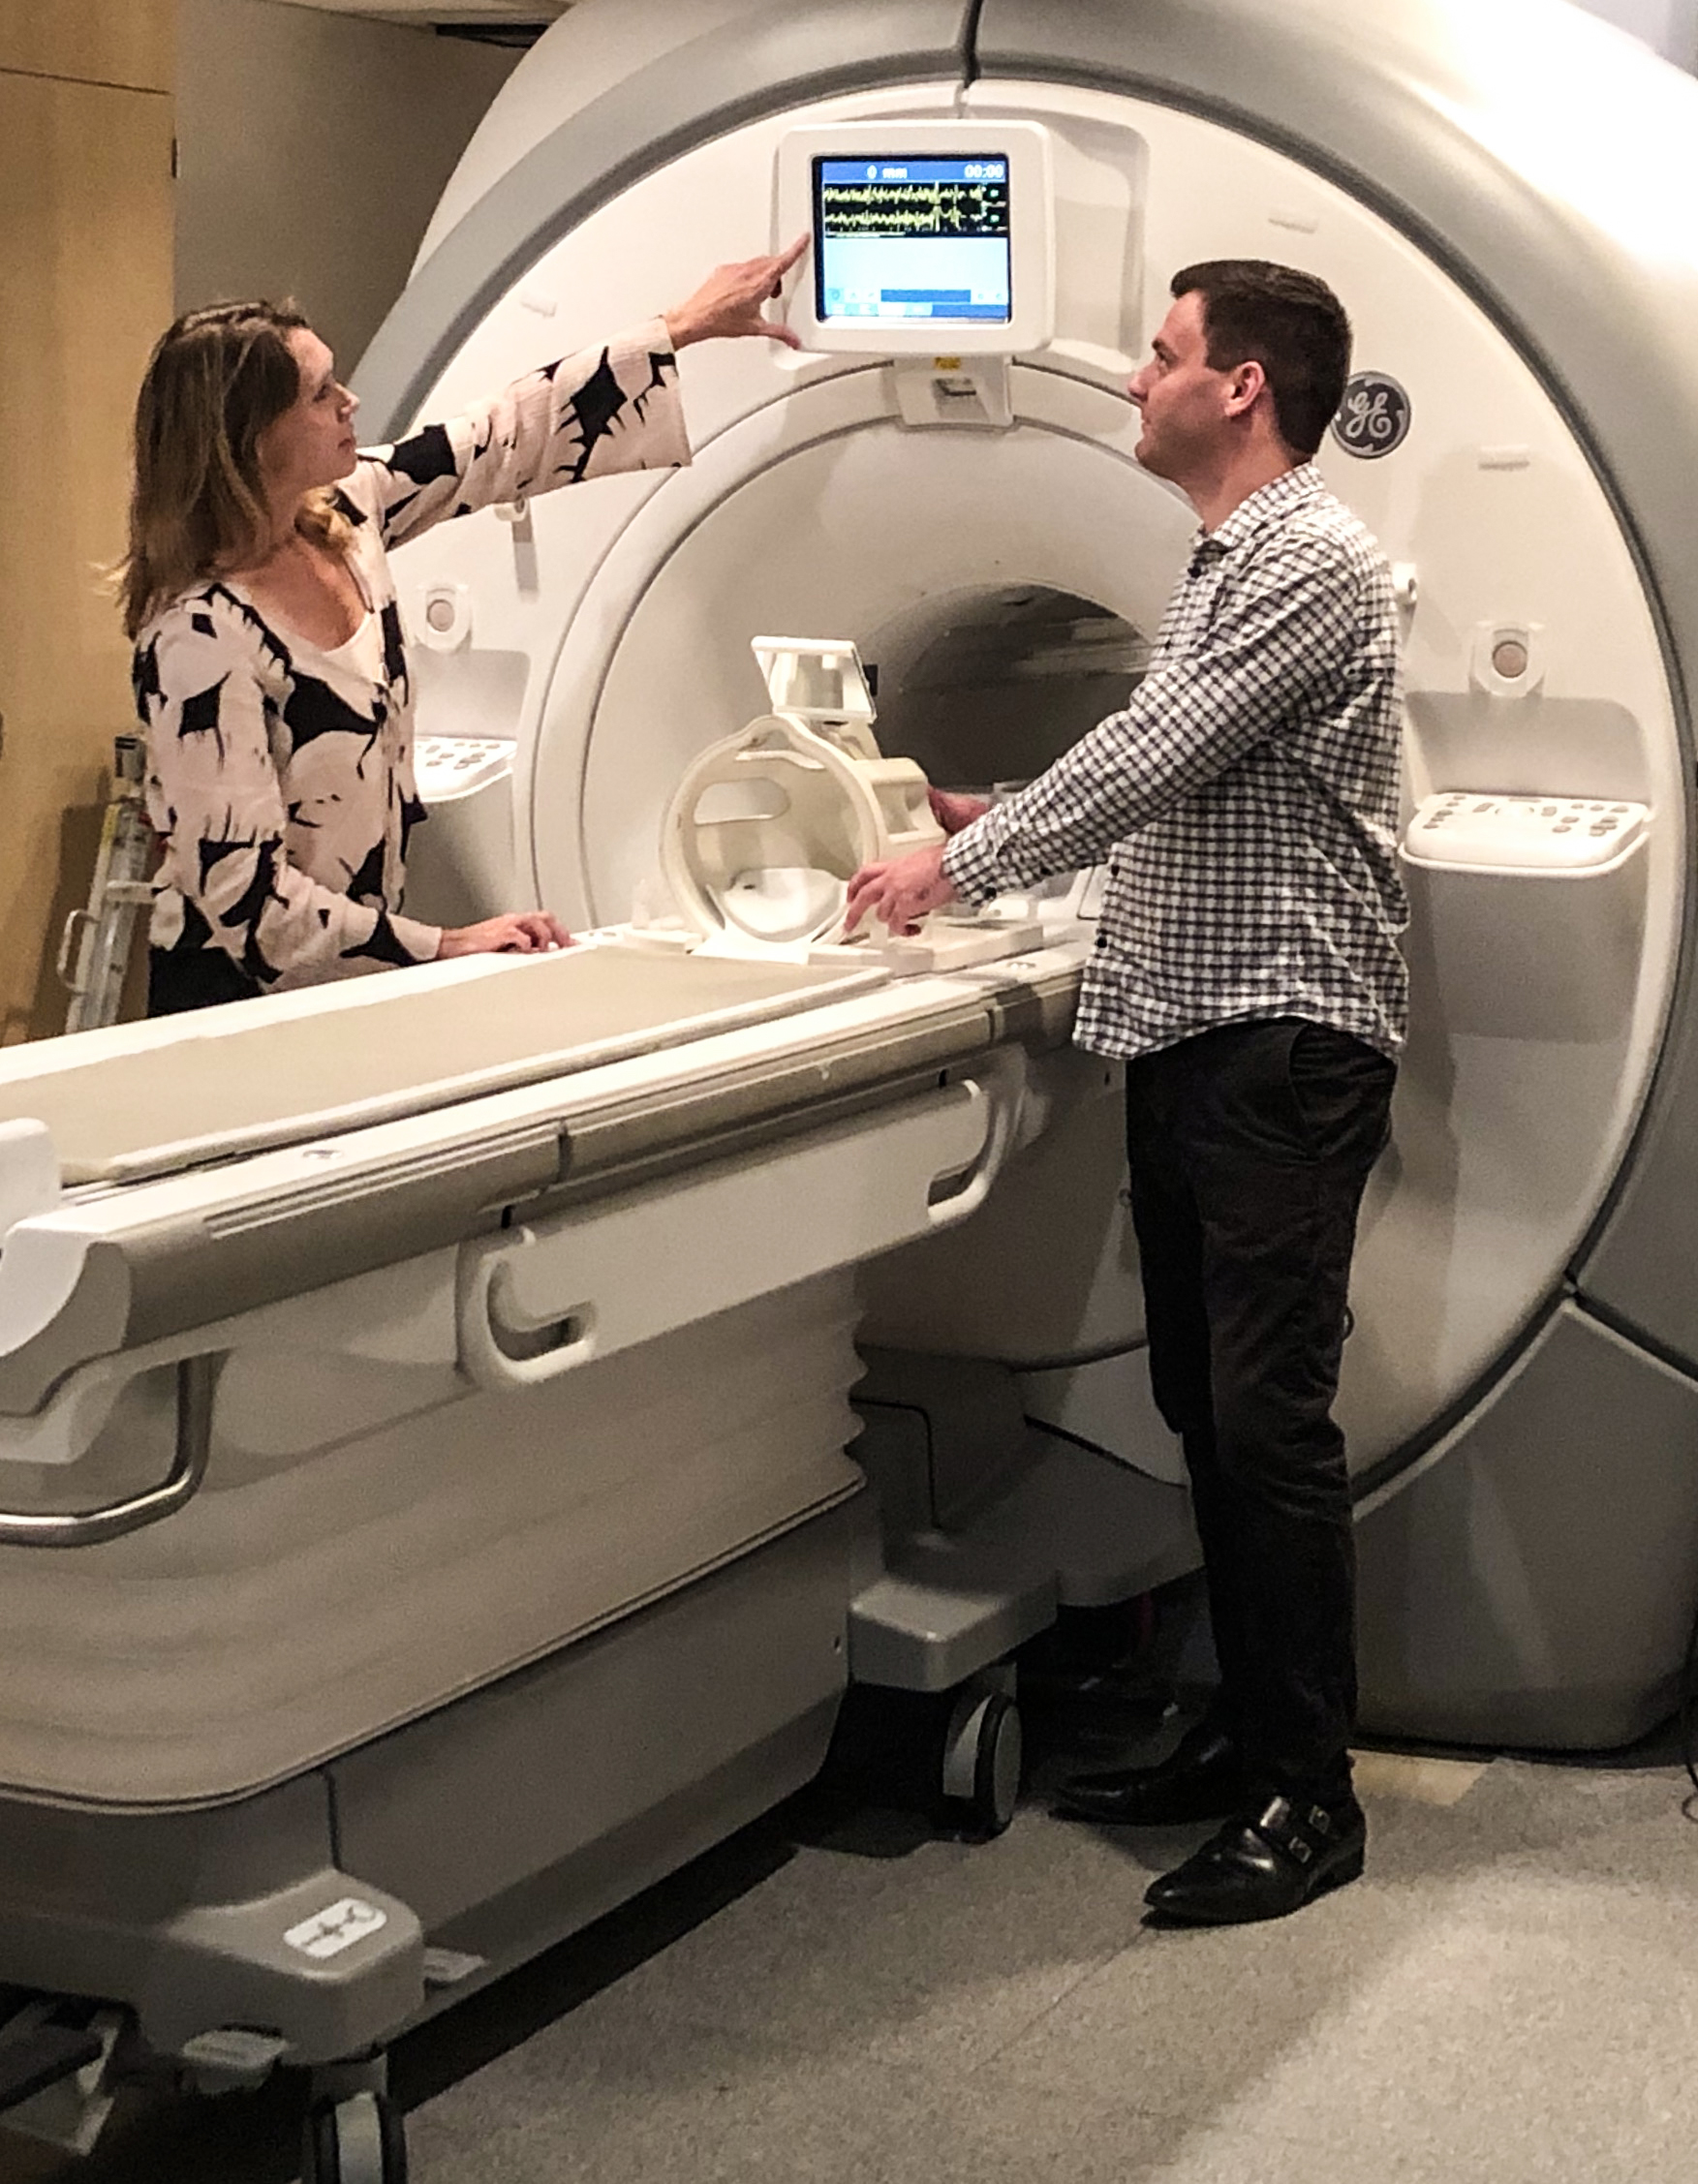 Dr. Maluf (left) and research assistant Mike Walsh (right) discuss functional magnetic resonance imaging (fMRI) of the brain and neck.